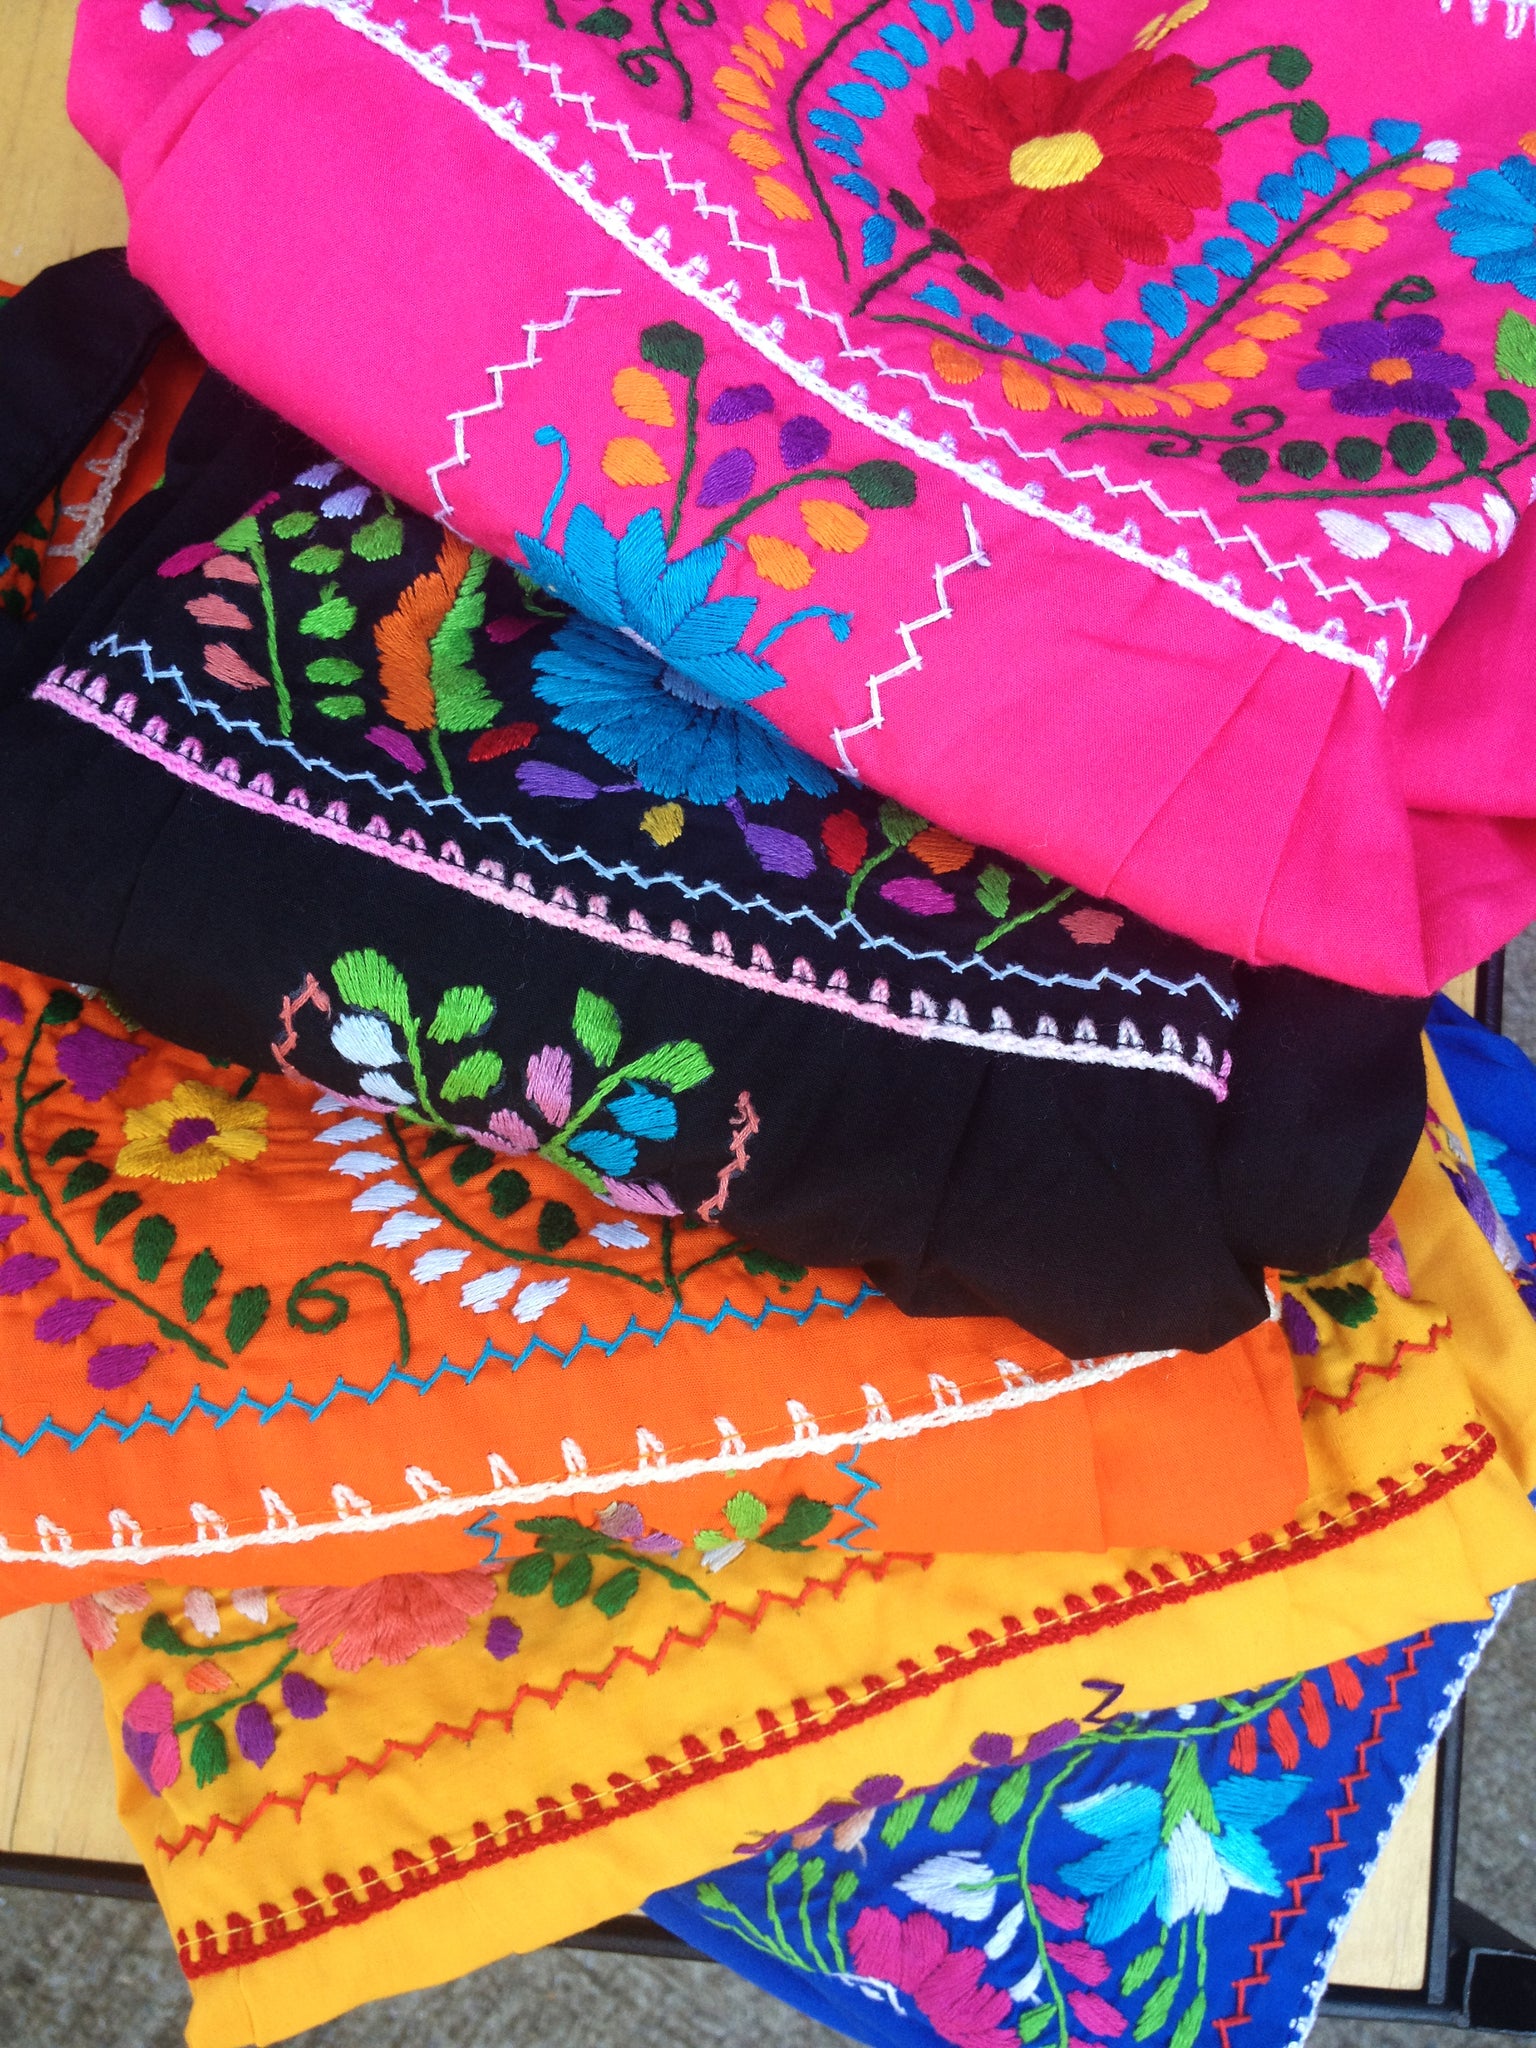 Authentic handmade embroidered Mexican Peasant dress colors